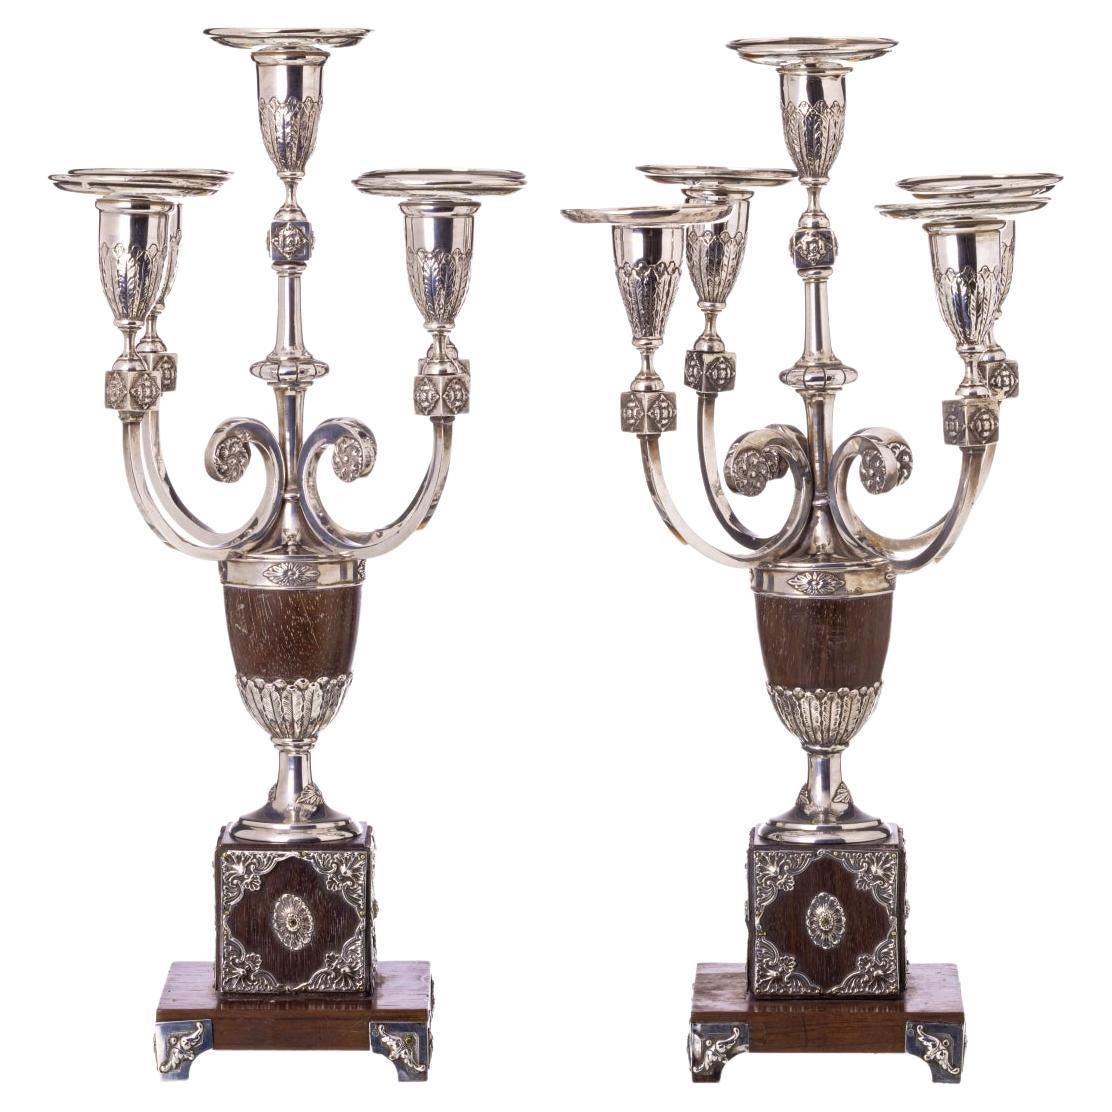 Pair of Silver Candlesticks 19th Century